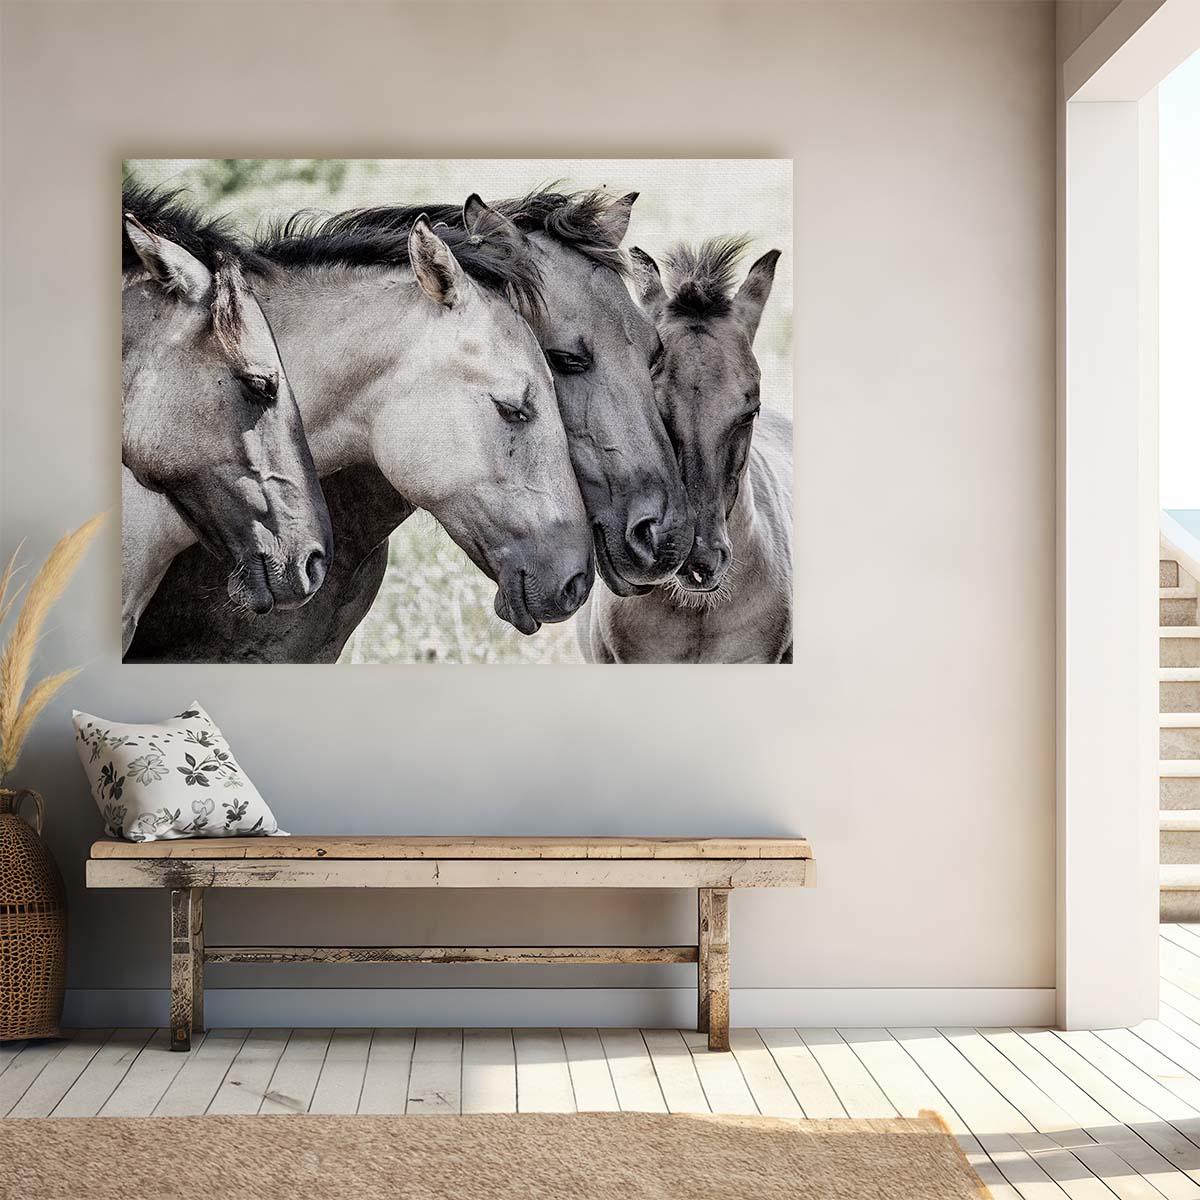 Romantic Konik Horses Countryside Encounter Wall Art by Luxuriance Designs. Made in USA.